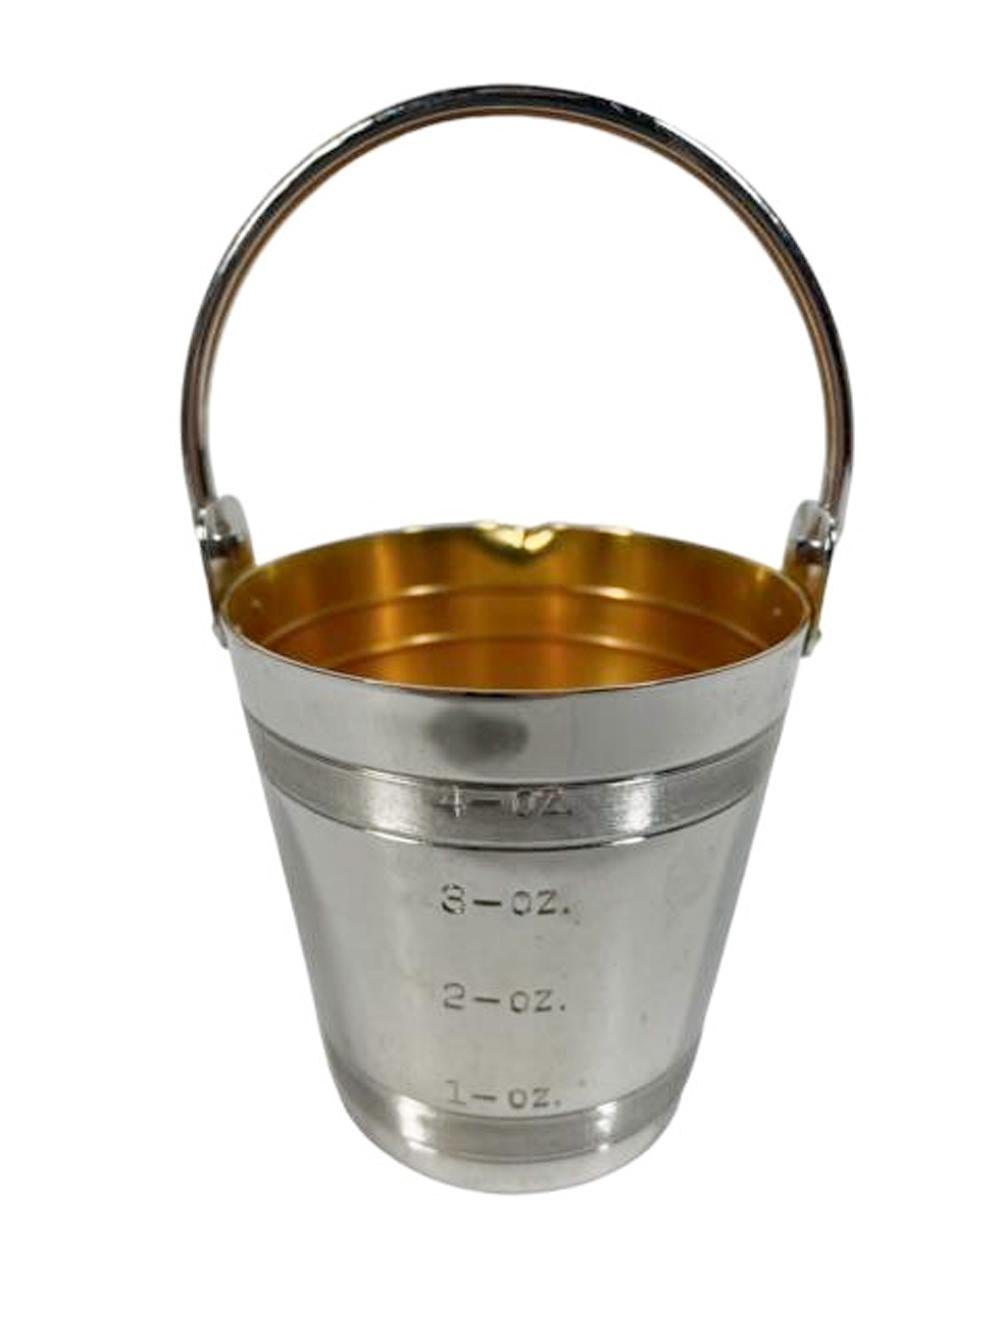 Vintage silver plate spirit measure / jigger by Napier in the form of a pail inscribed 